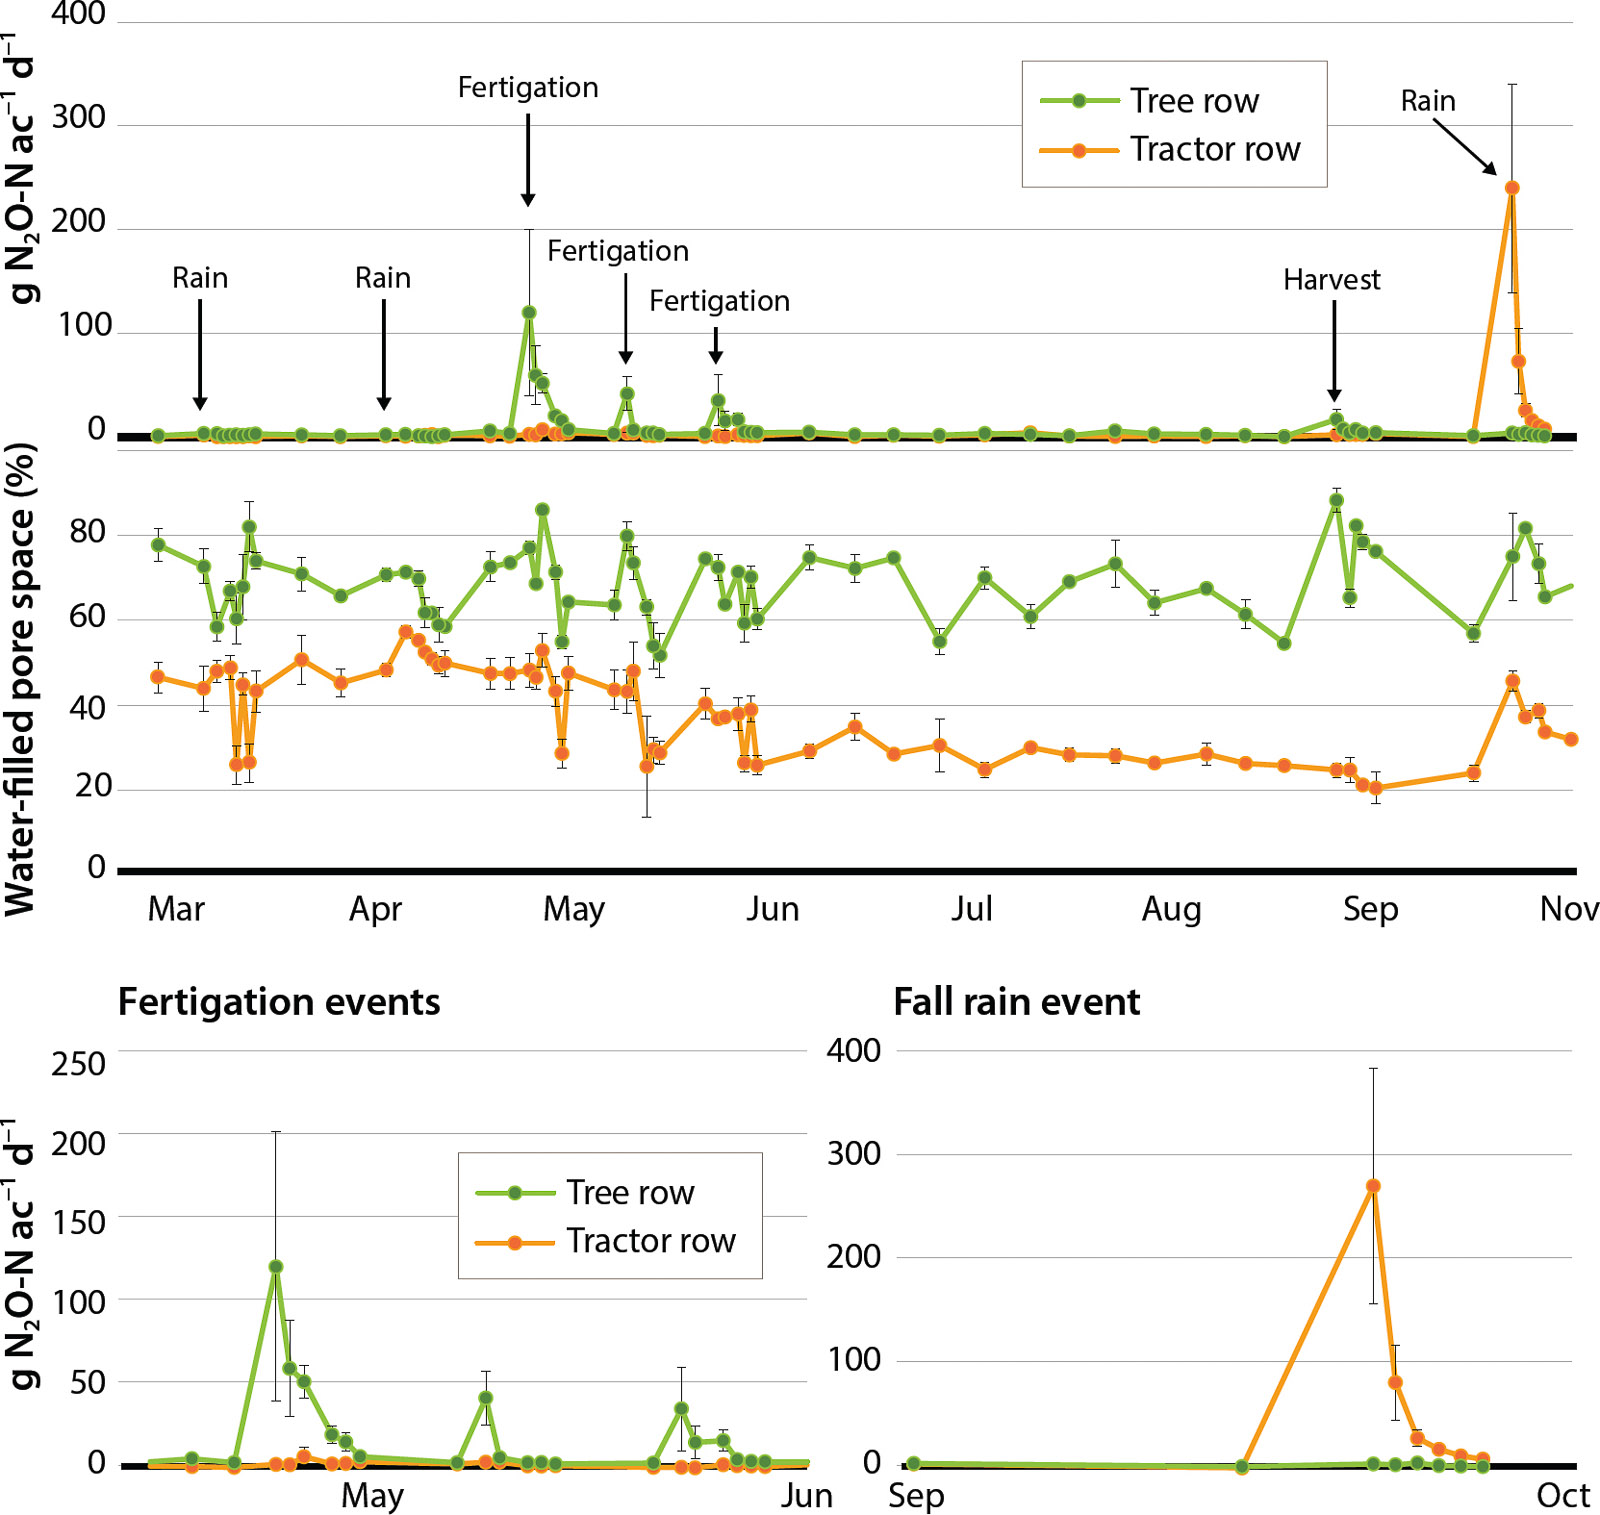 Examples of temporal and spatial dynamics of N<sub>2</sub>O emissions from a prune orchard, illustrating the effects of fertigation and precipitation events. Tree row = green dots, tractor row = orange dots.